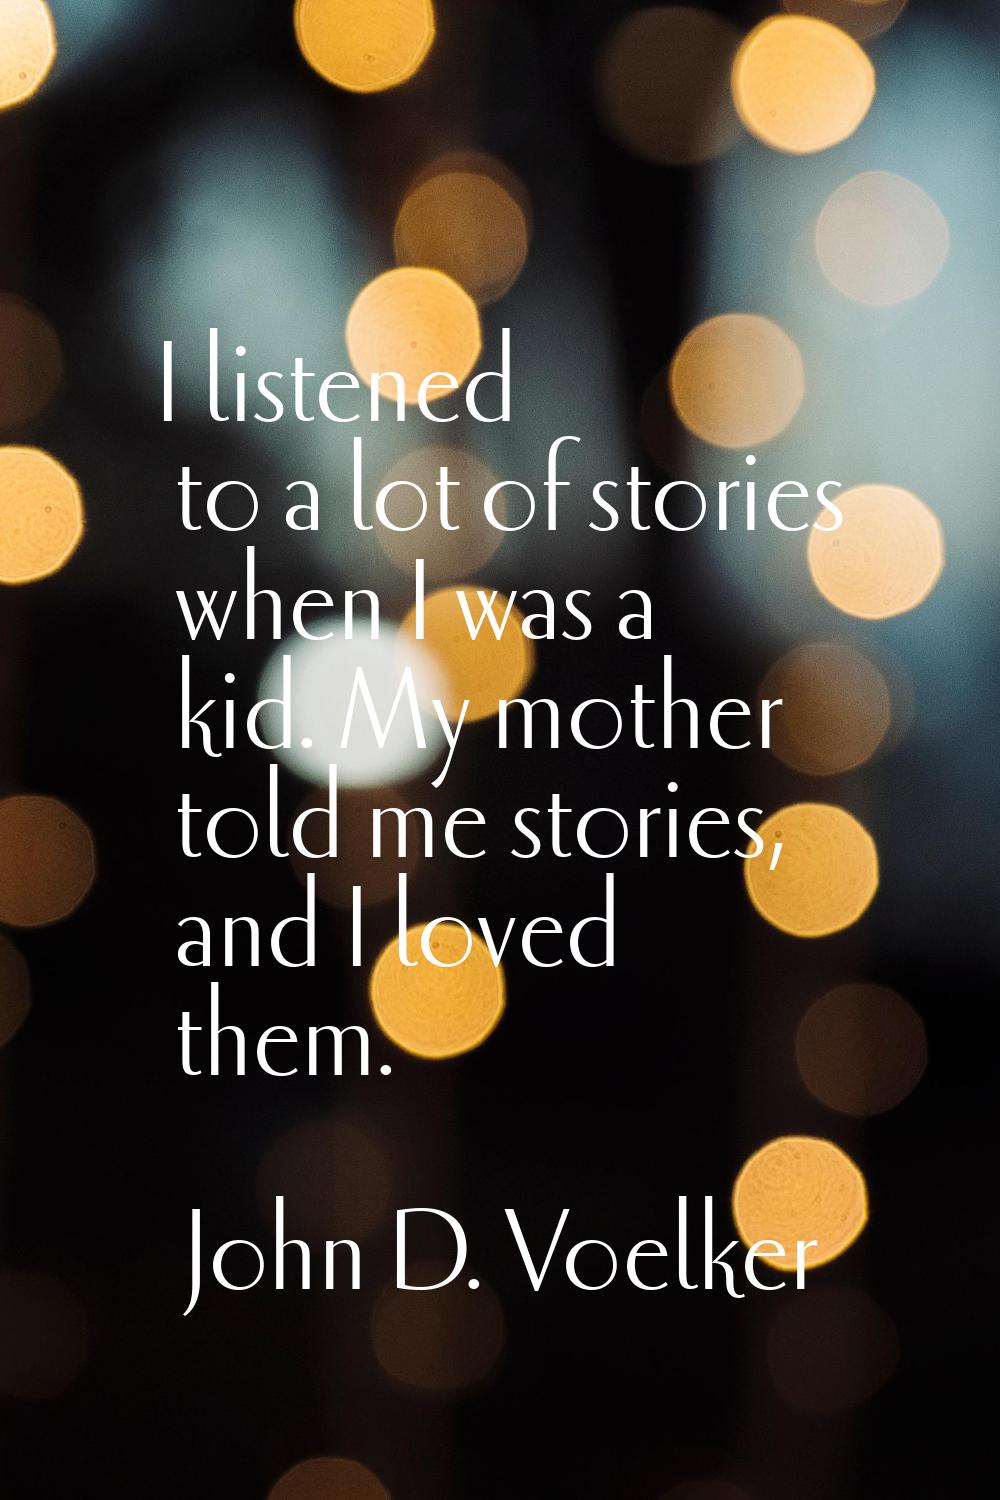 I listened to a lot of stories when I was a kid. My mother told me stories, and I loved them.